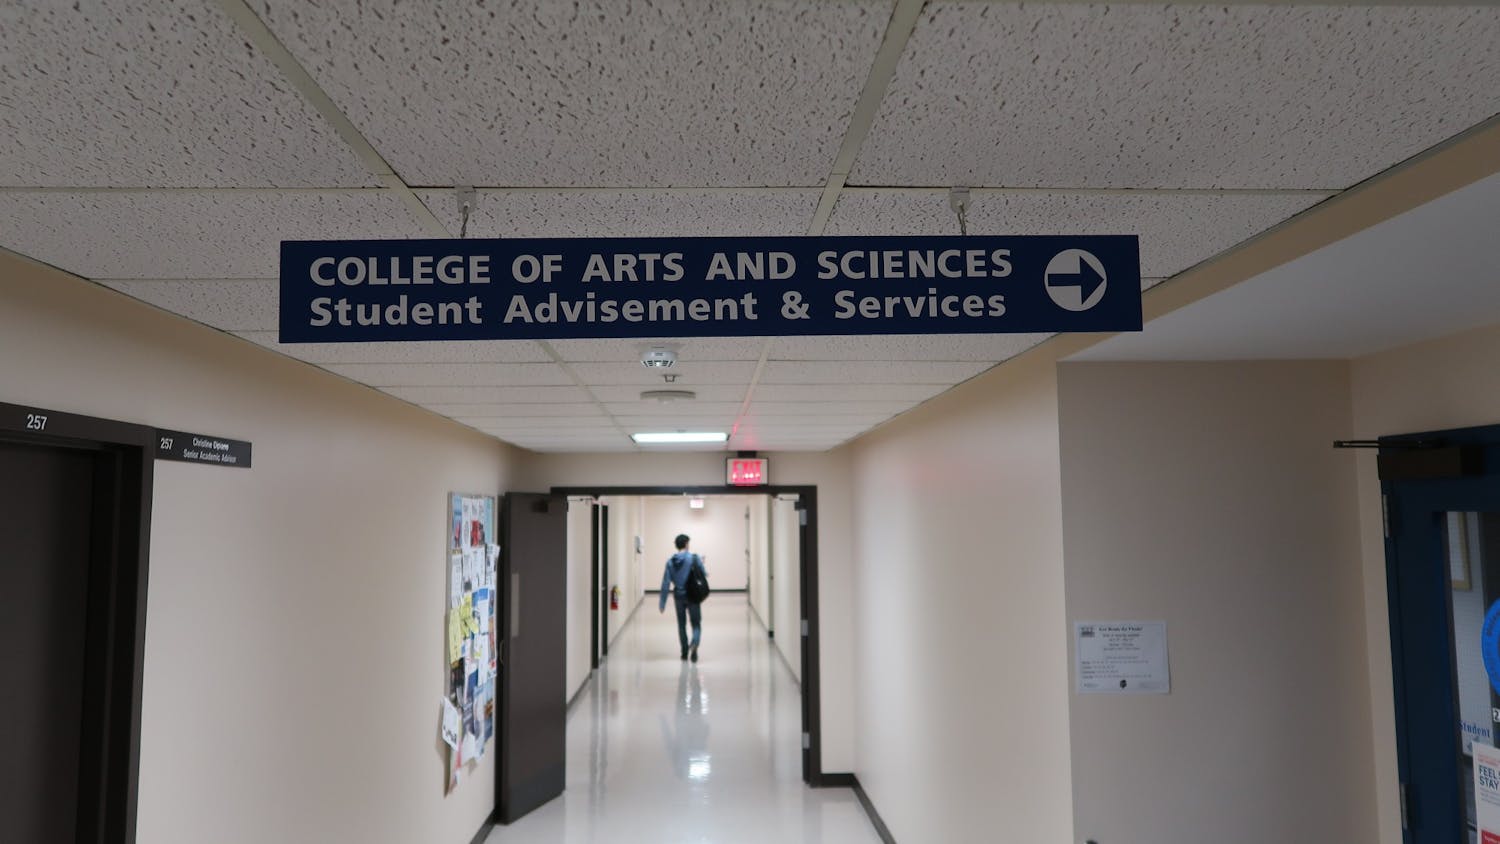 Students from the College of Arts and Sciences voiced concerns about academic advising at UB.